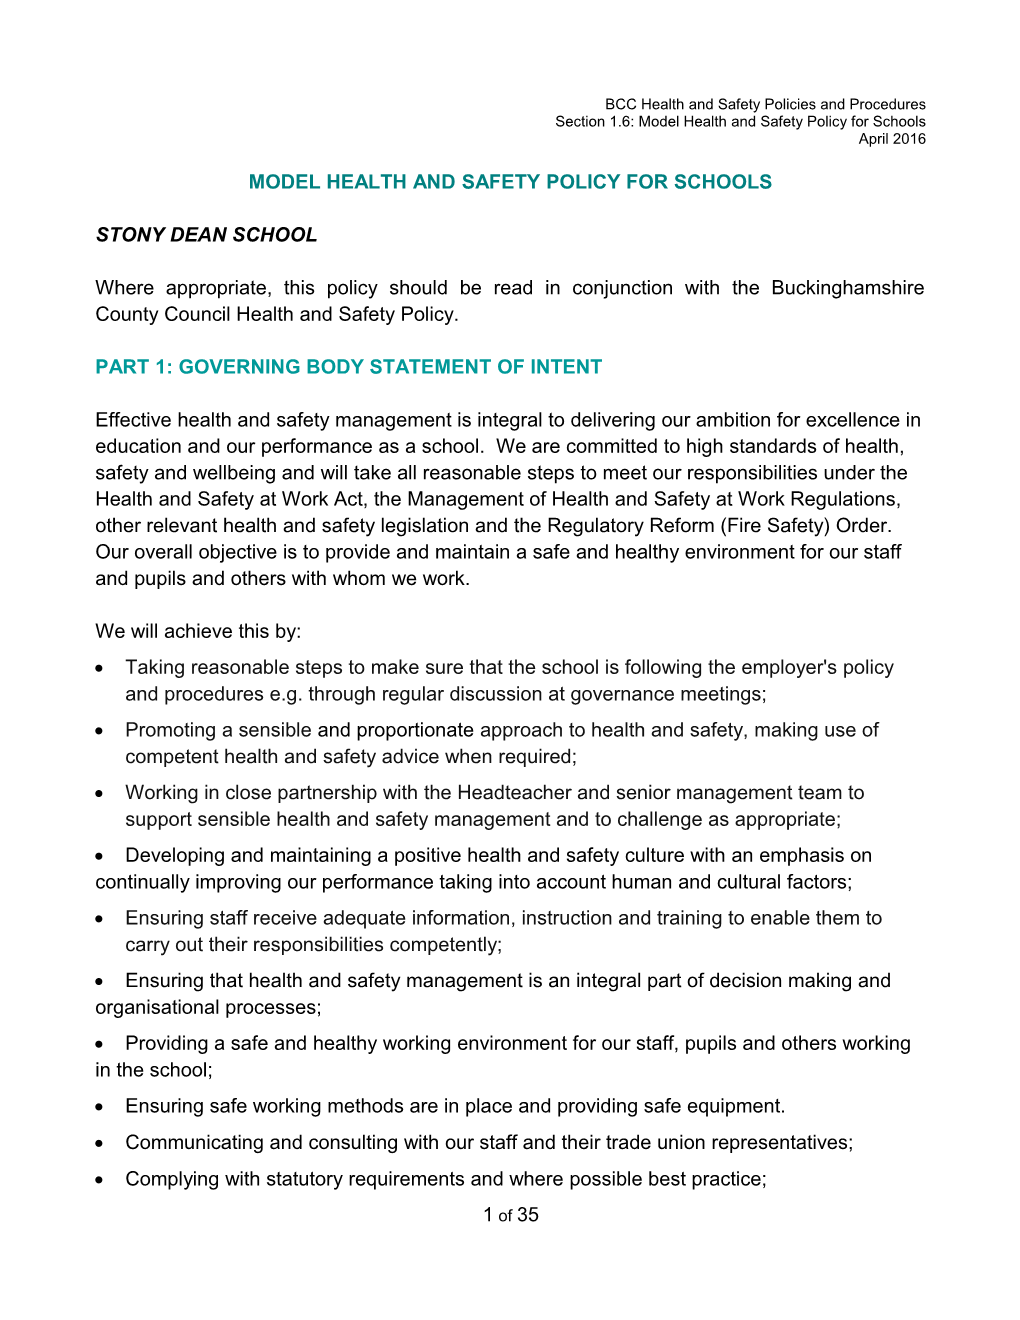 Model Health and Safety Statement